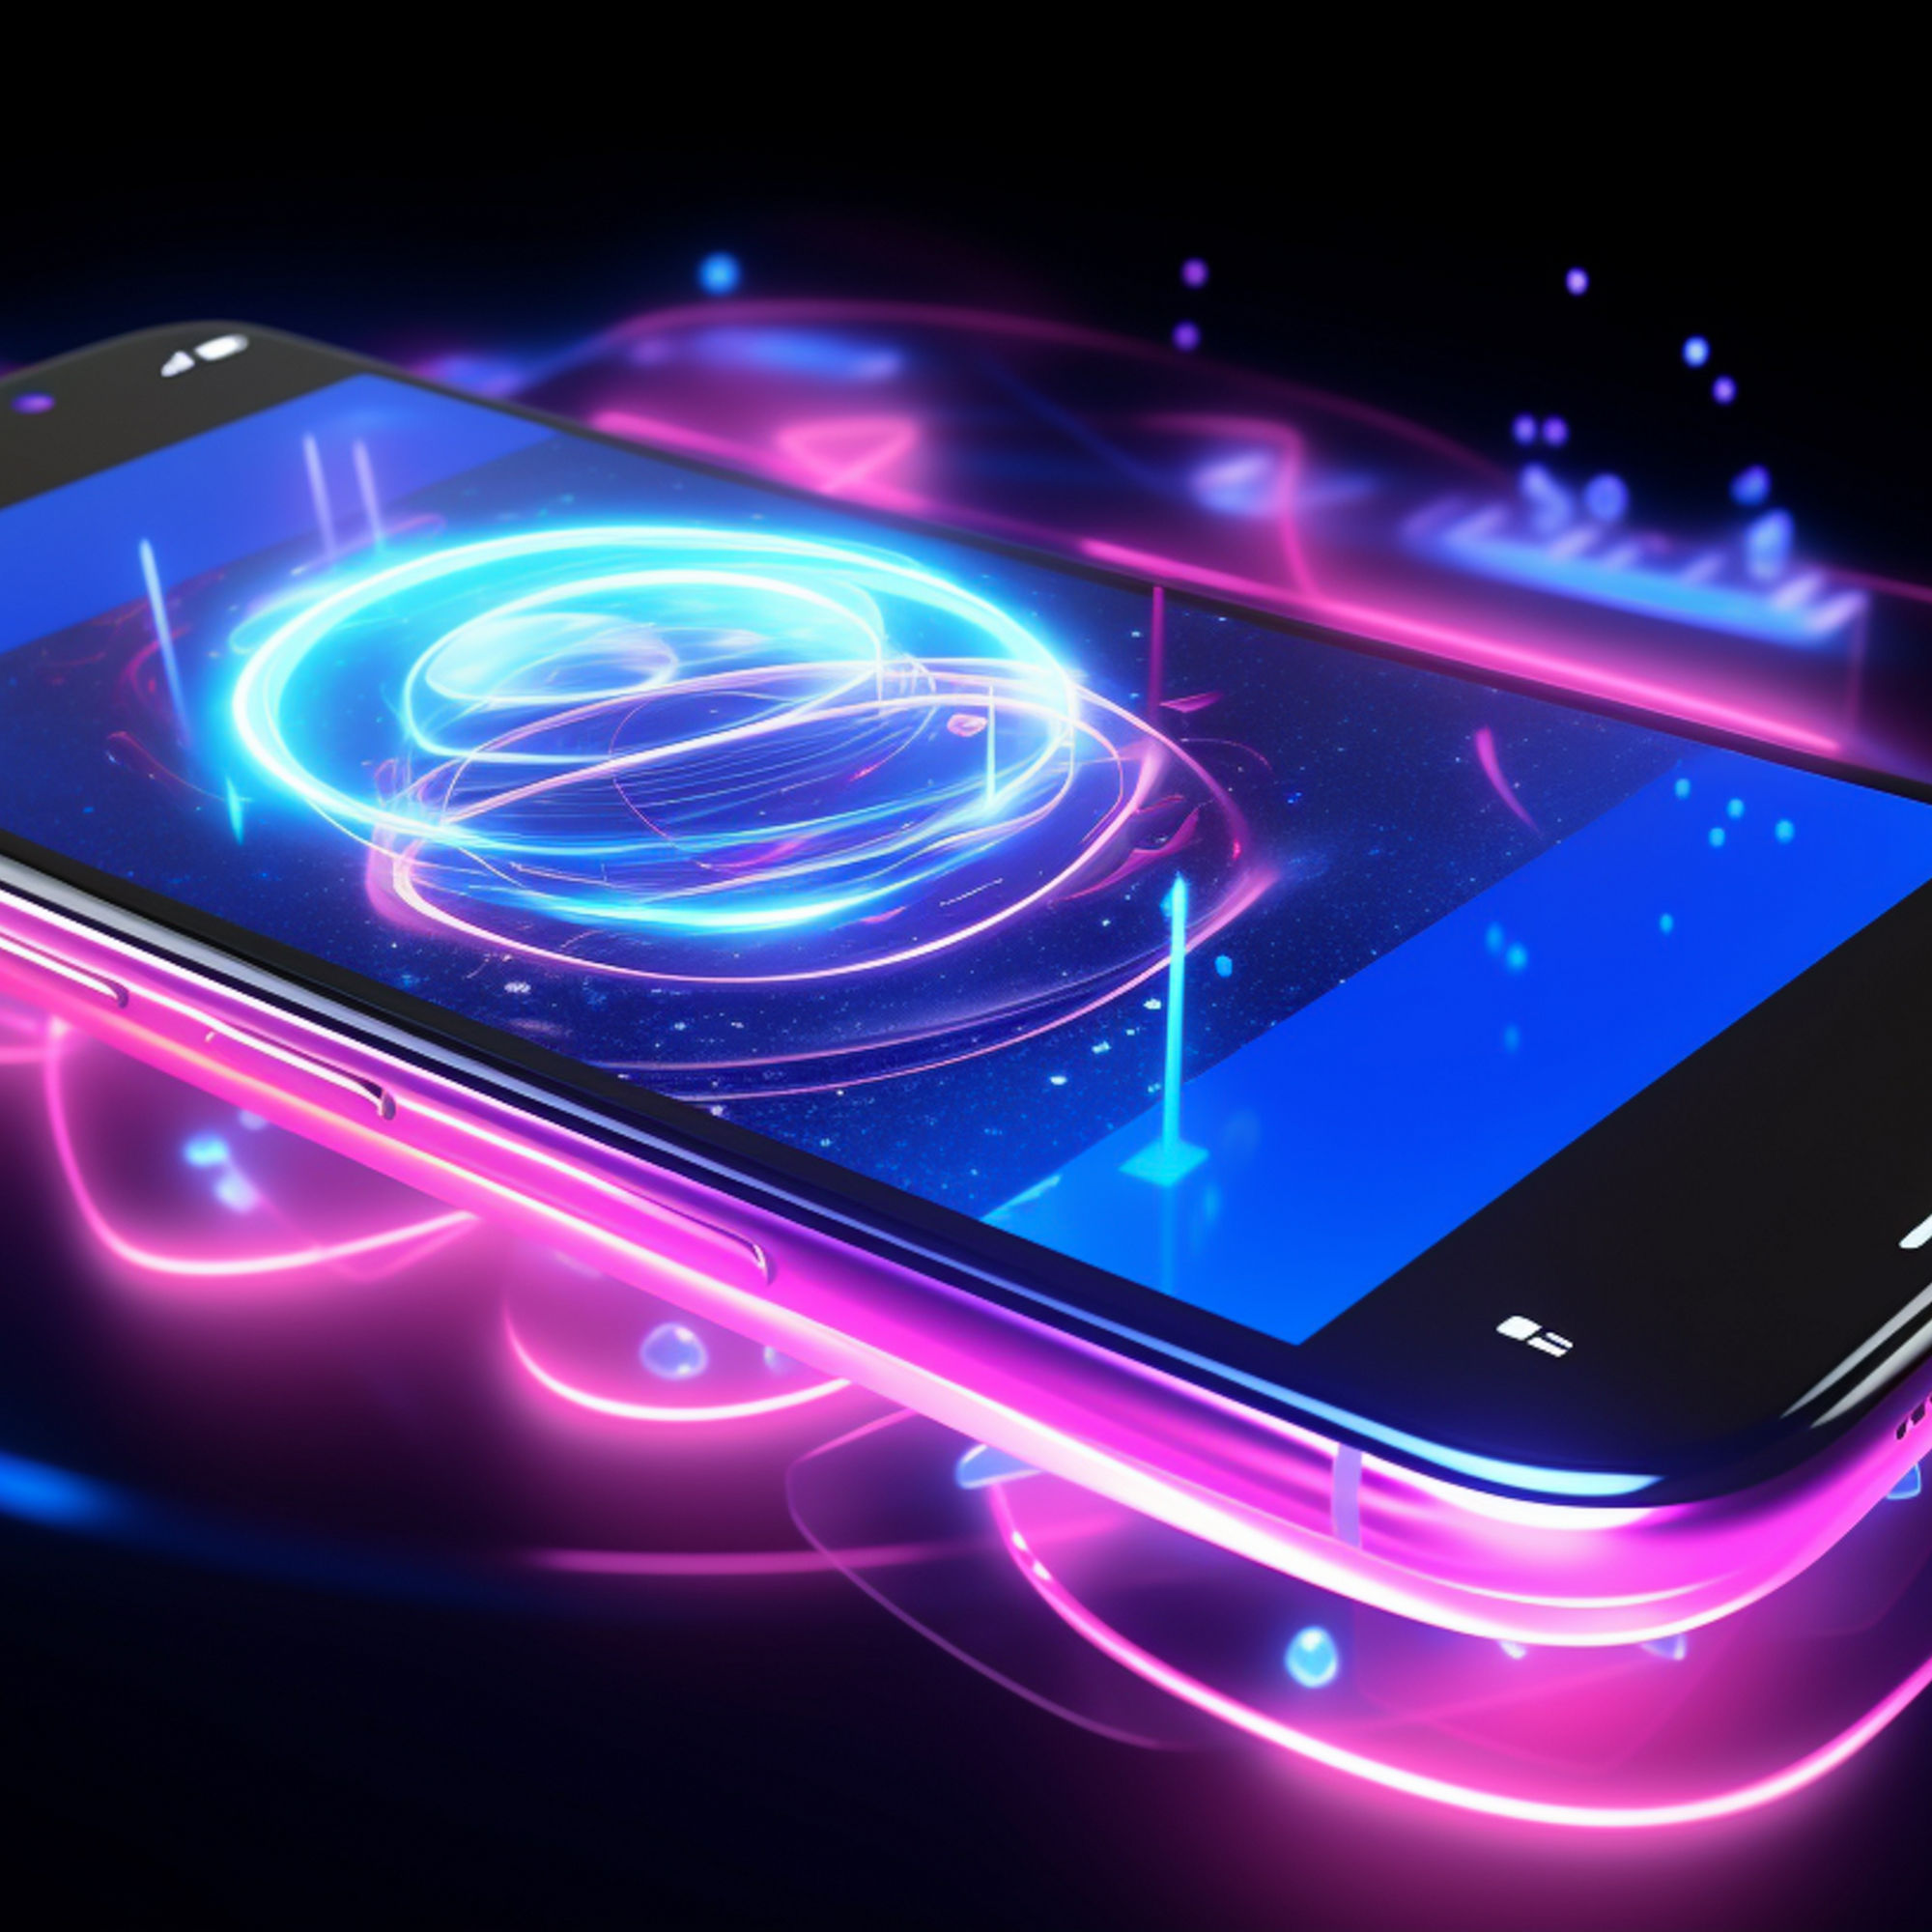 Hologram 3D futuristic mobile phone. Abstract digital user interface technology. Smartphone hangs in the air. Realistic phone with blank screen. Smartphone perspective view with blank screen